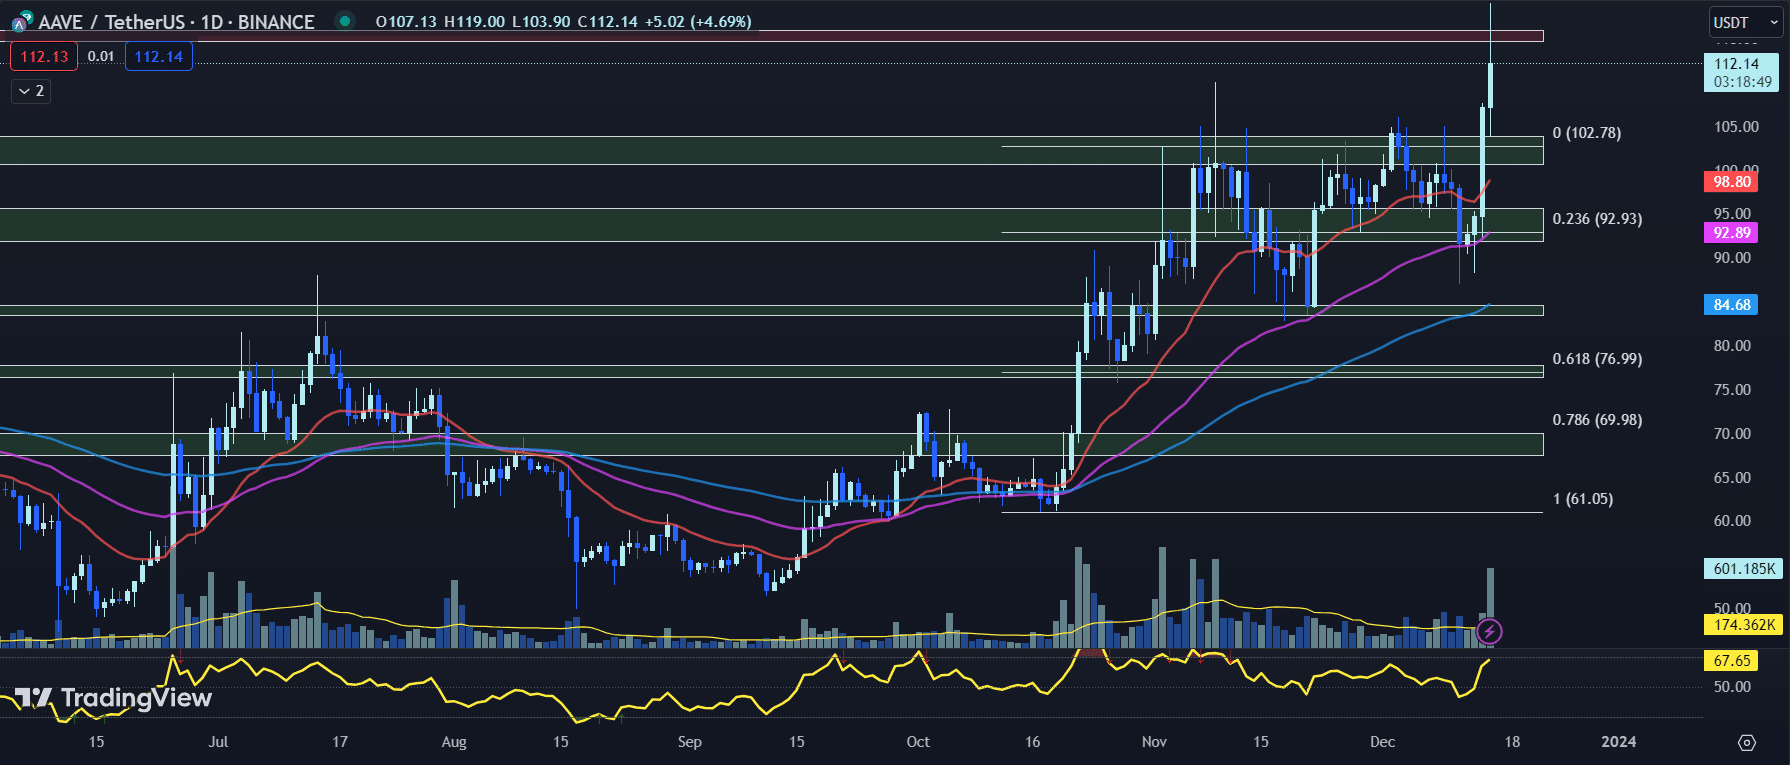 aave price chart in tradingview